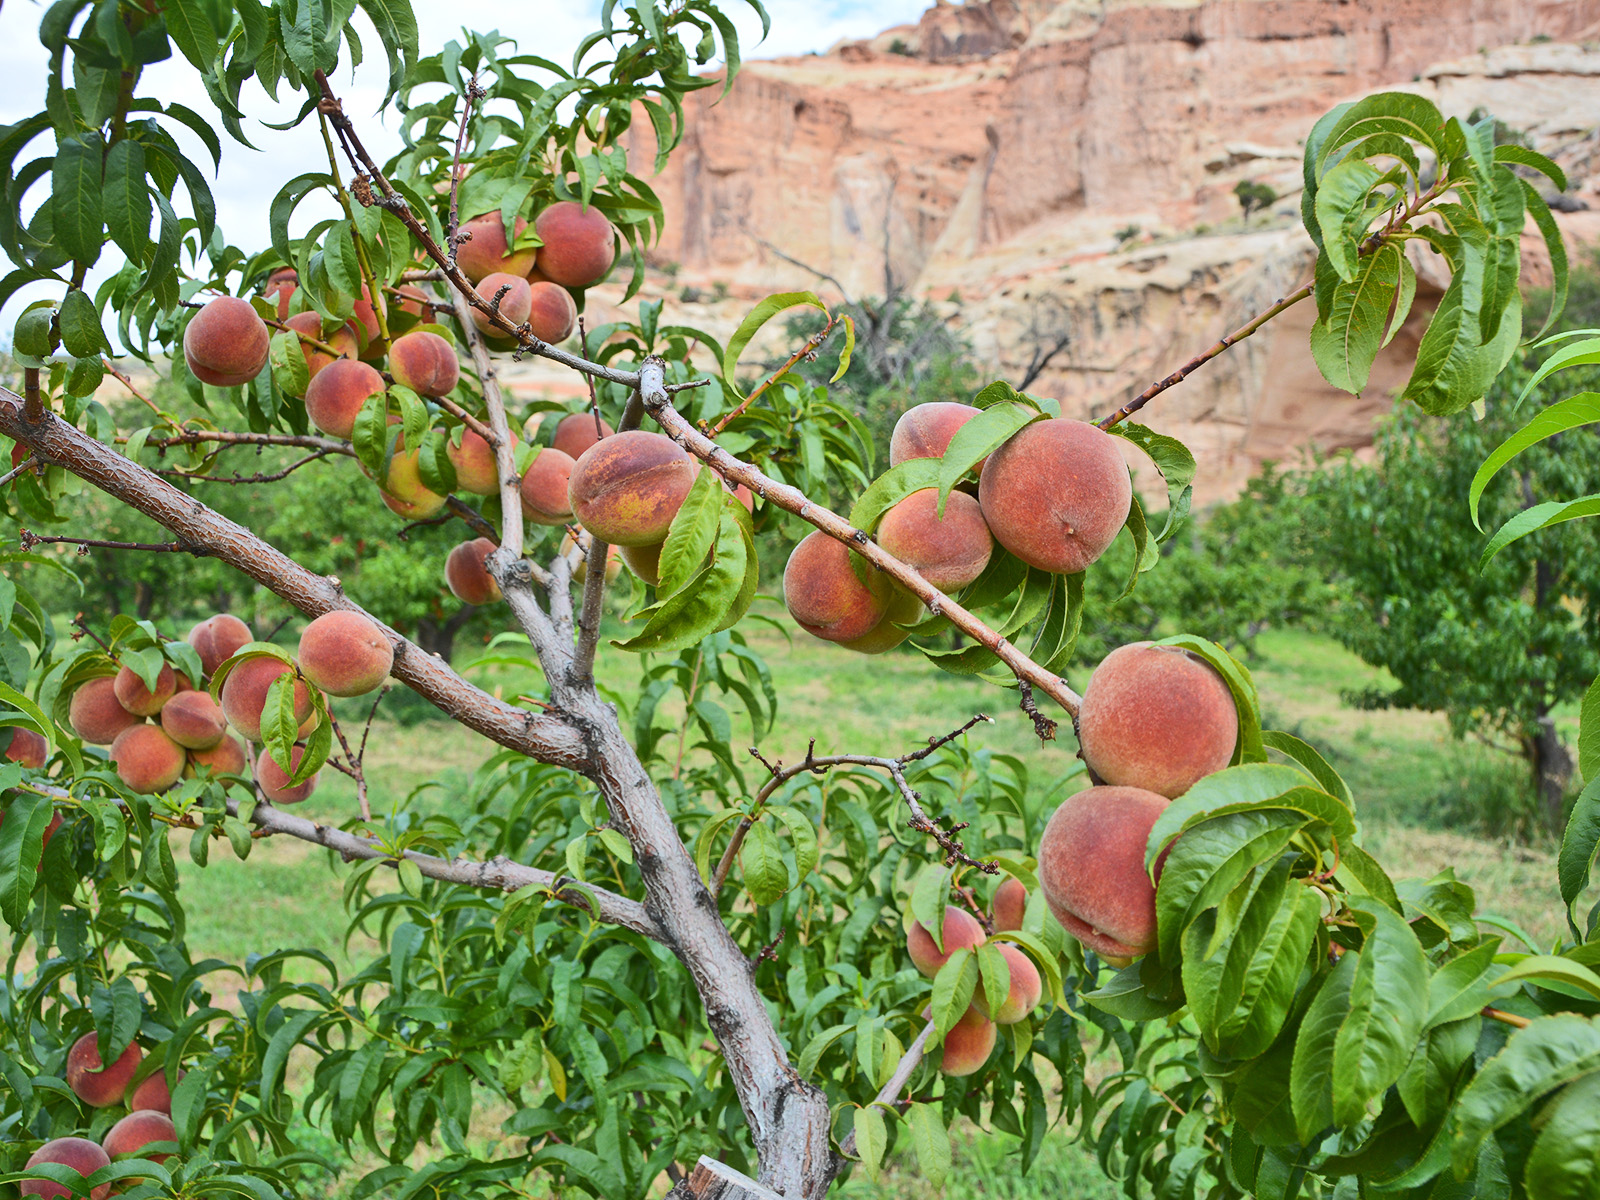 Fruit tree with peaches in front of red sandstone cliffs